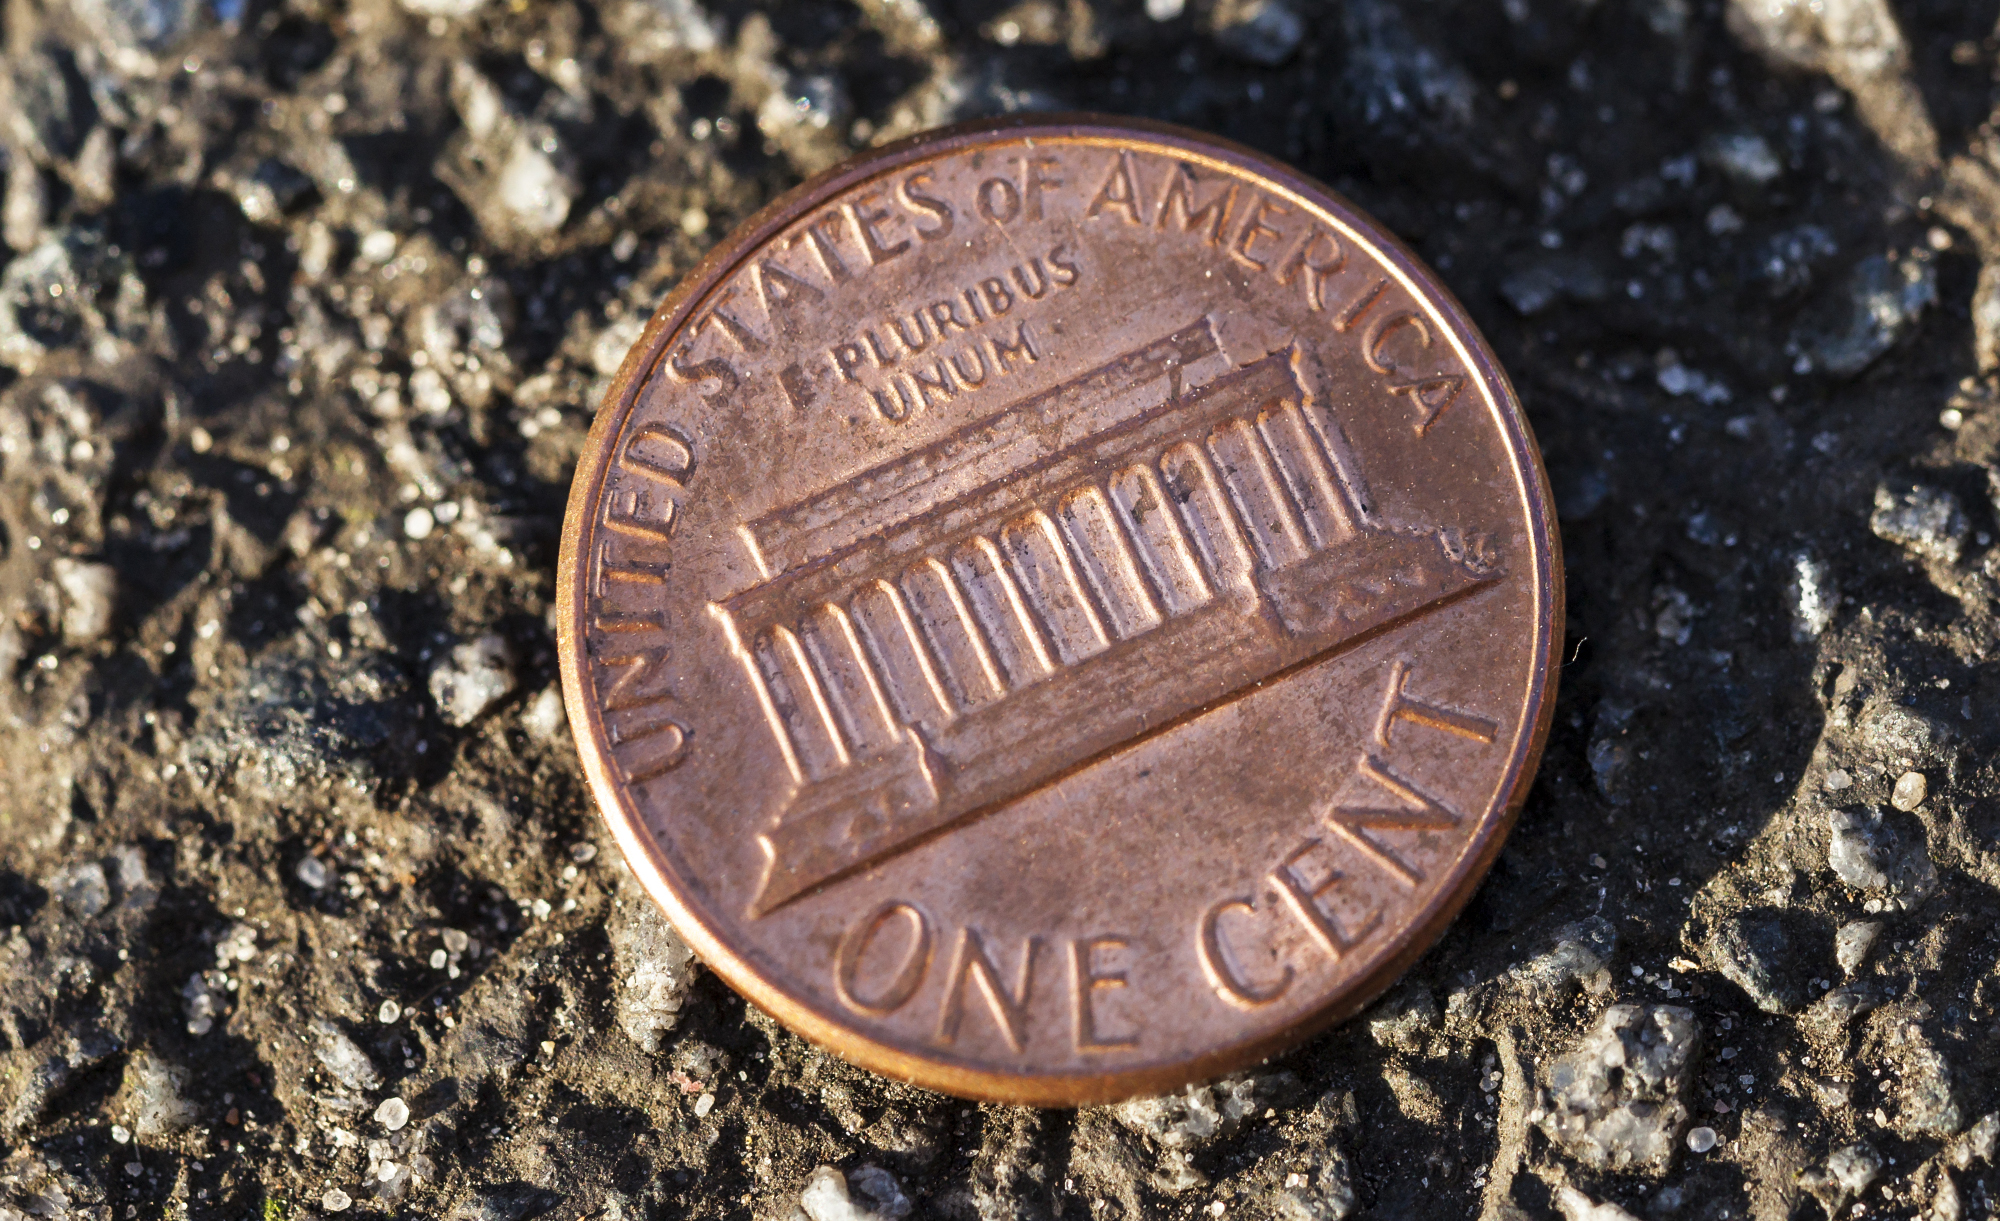 Since there are 3600 seconds in an hour, and most people make less than $36.00/hr, their time is worth less than a penny per second. It's literally worth your time to pick up a penny from the ground.